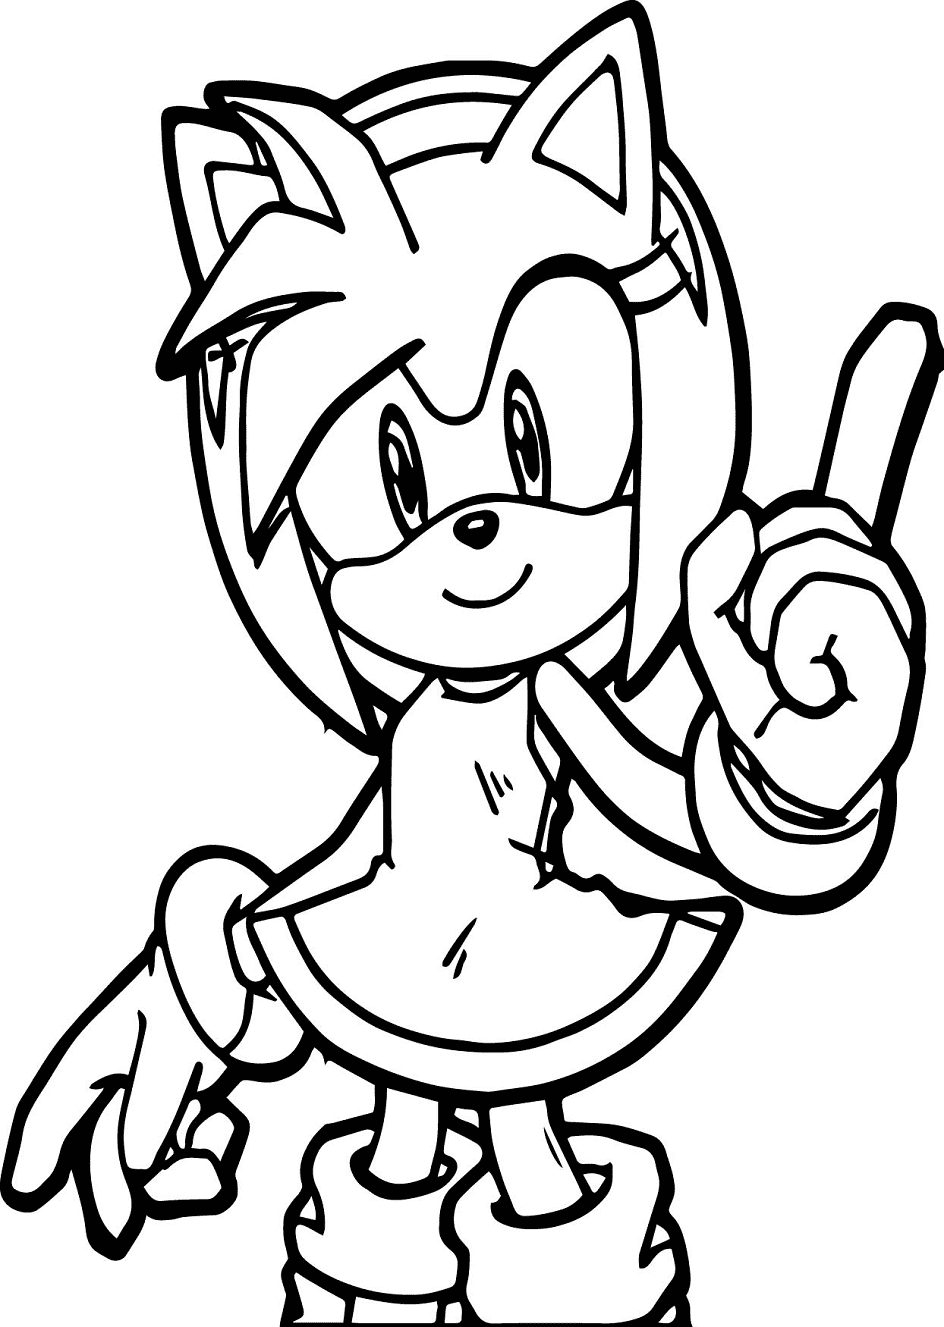 Amy Rose is Smiling Coloring Pages